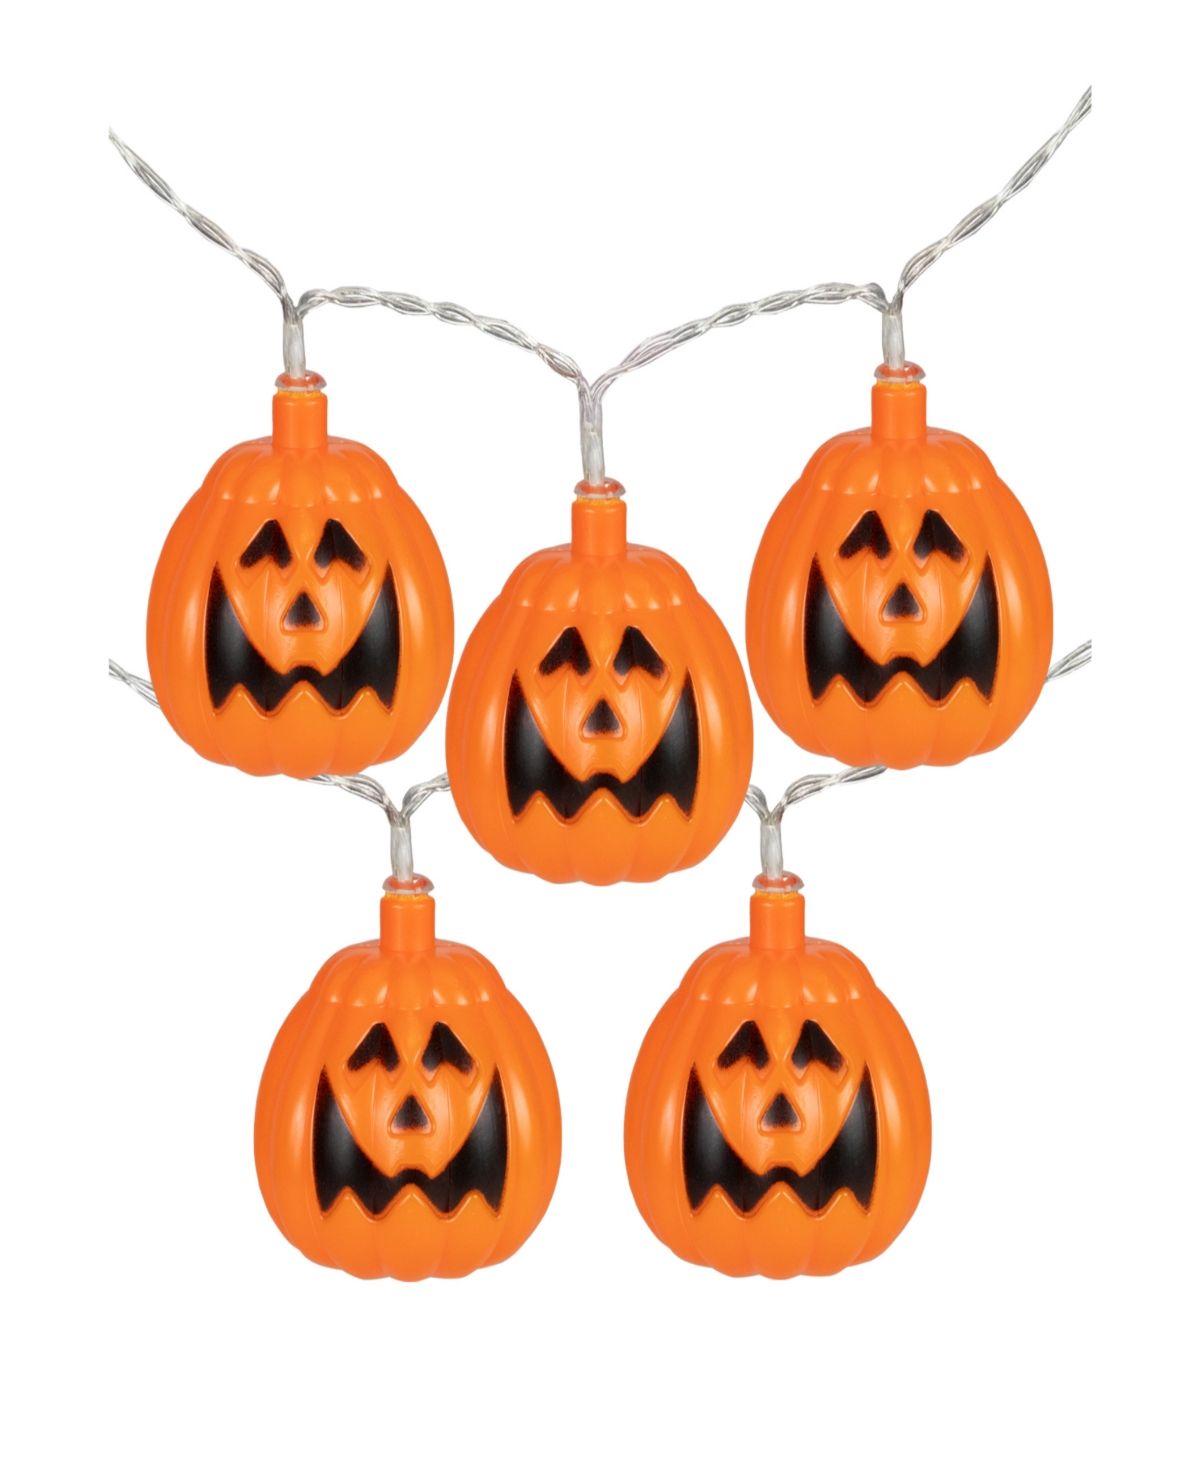 Northlight 10-count Led Jack-o-lantern Halloween Light Set, 3' Warm White Lights Clear Wire In Orange